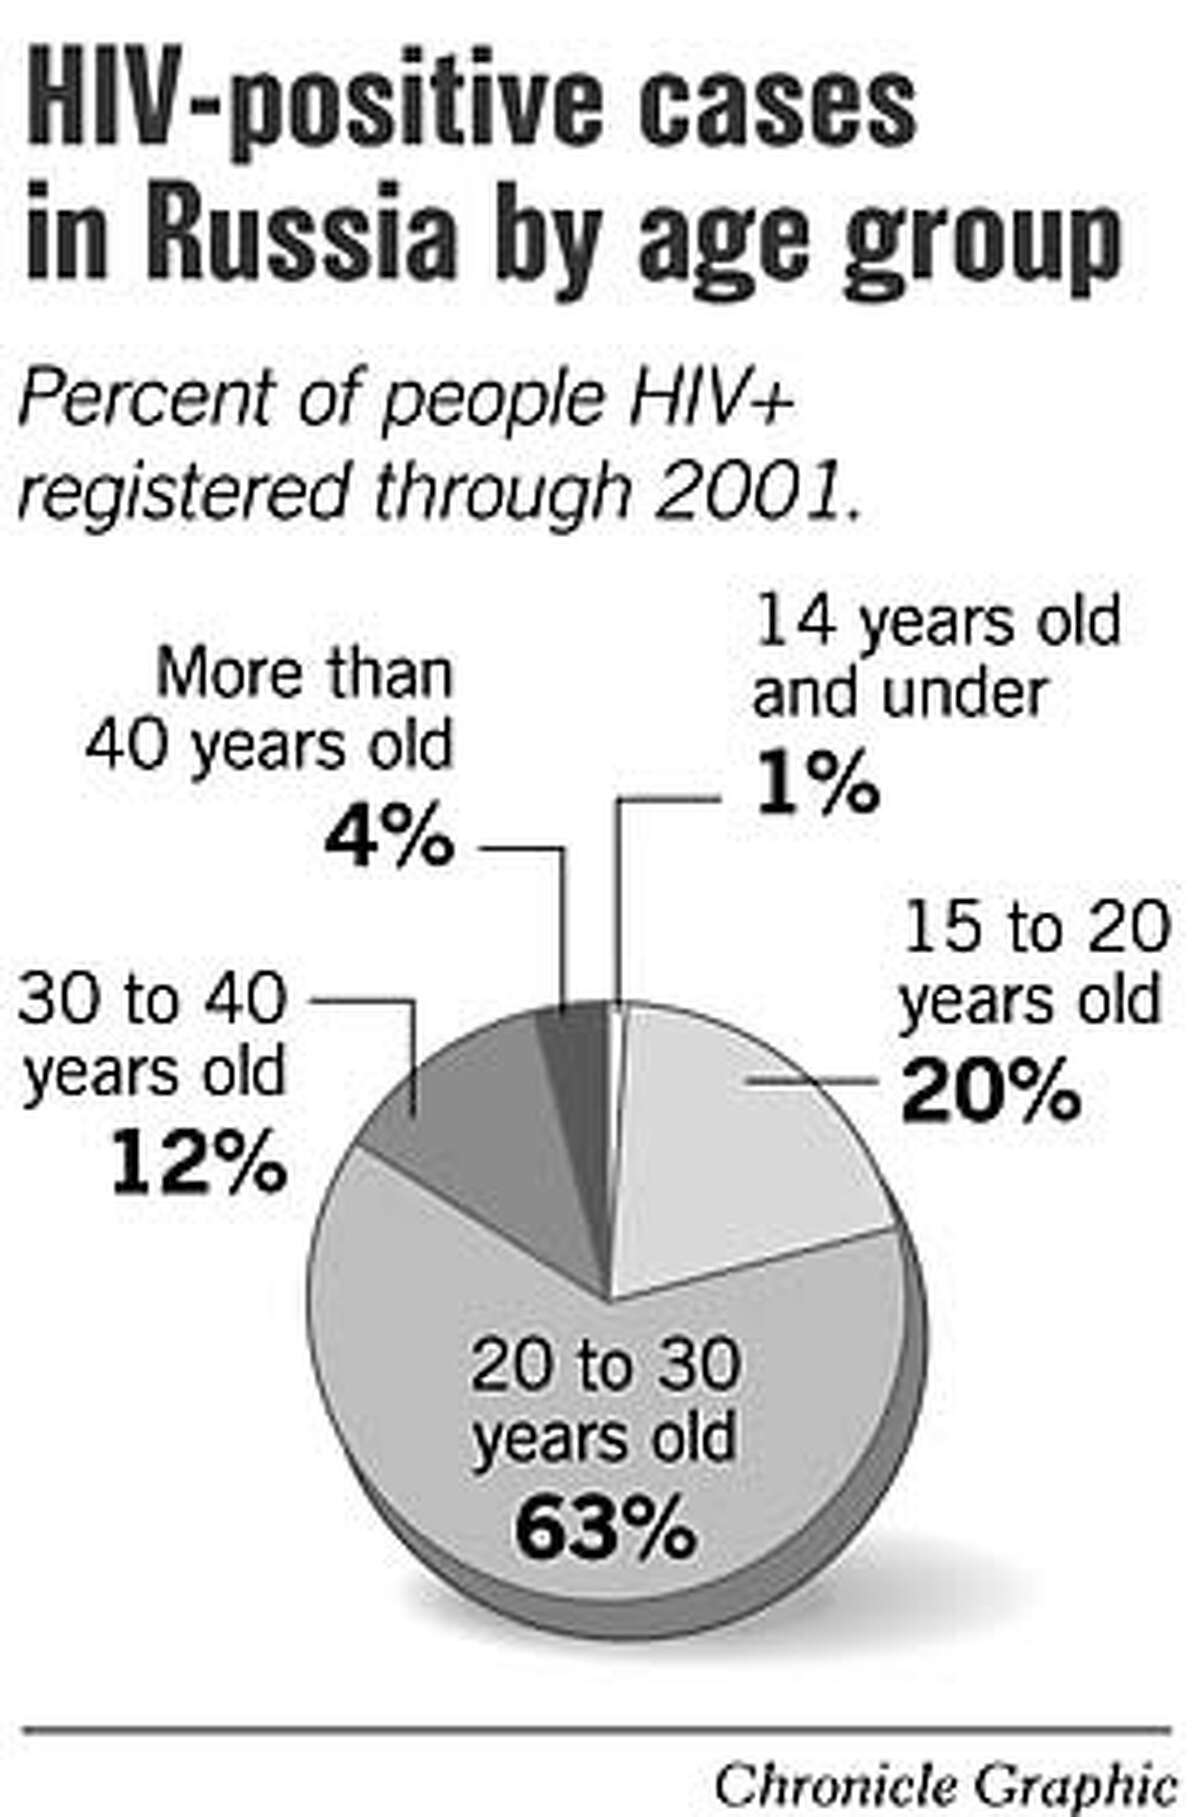 HIV-positive Cases in Russia by Age Group. Chronicle Graphic